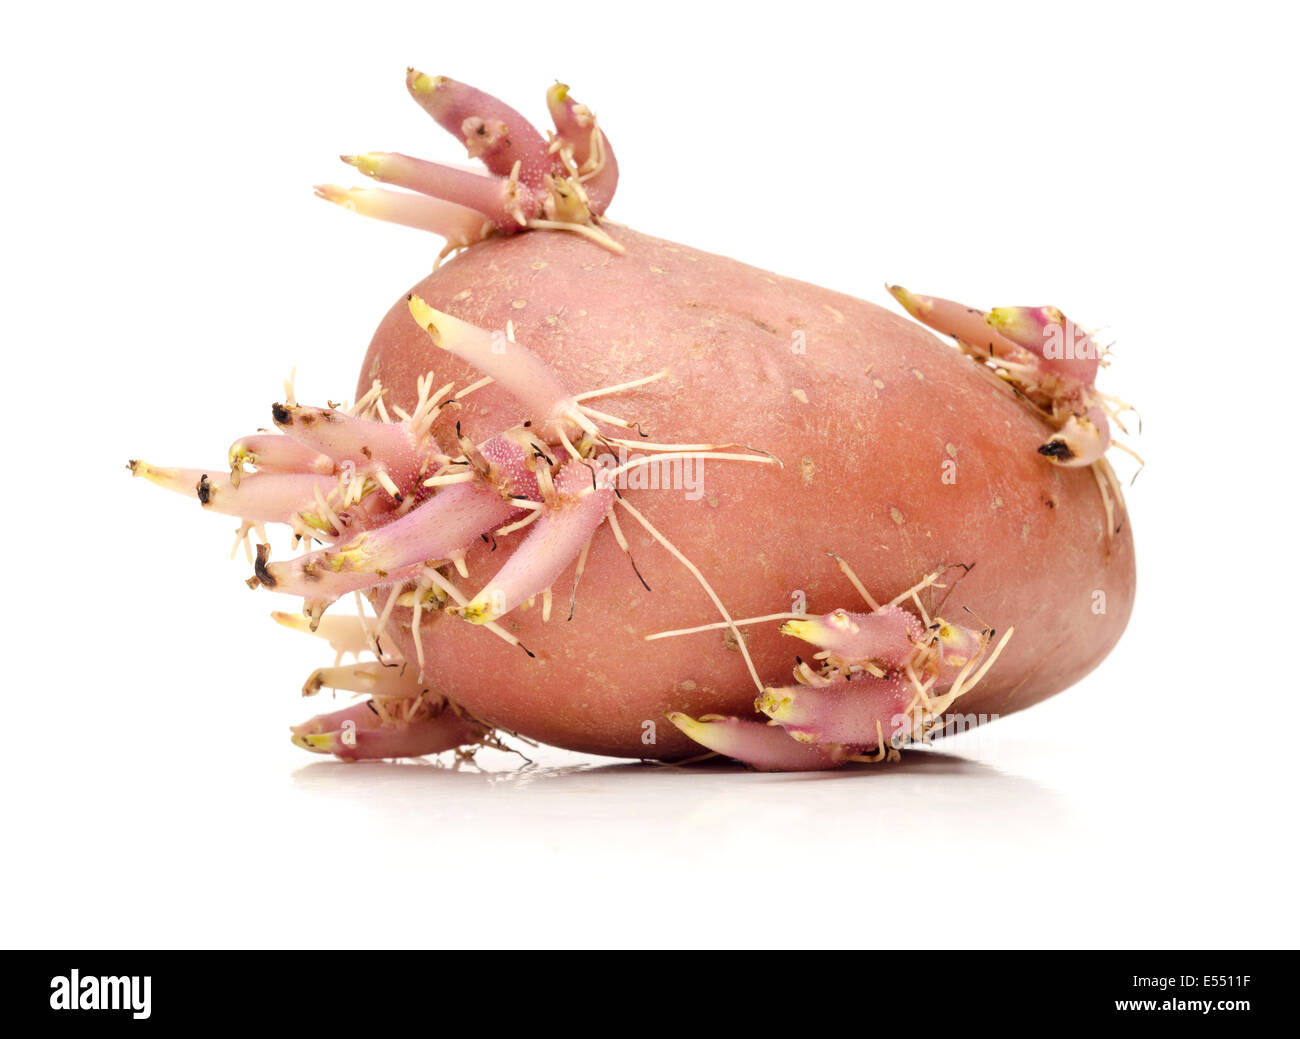 potato with sprouts Stock Photo